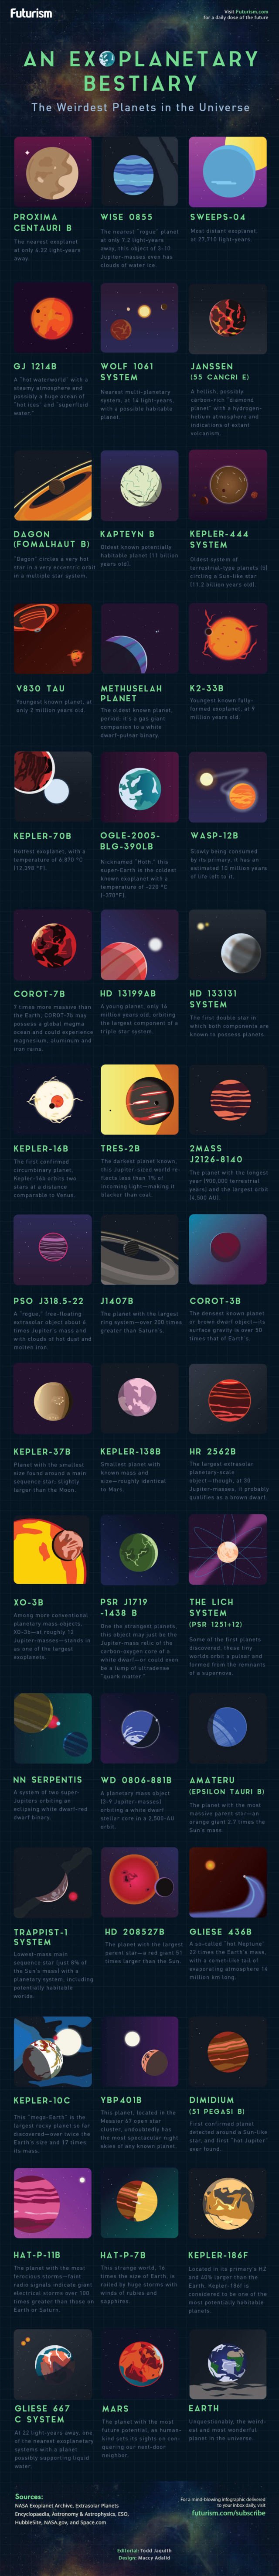 The weirdest Exoplanets - infographic